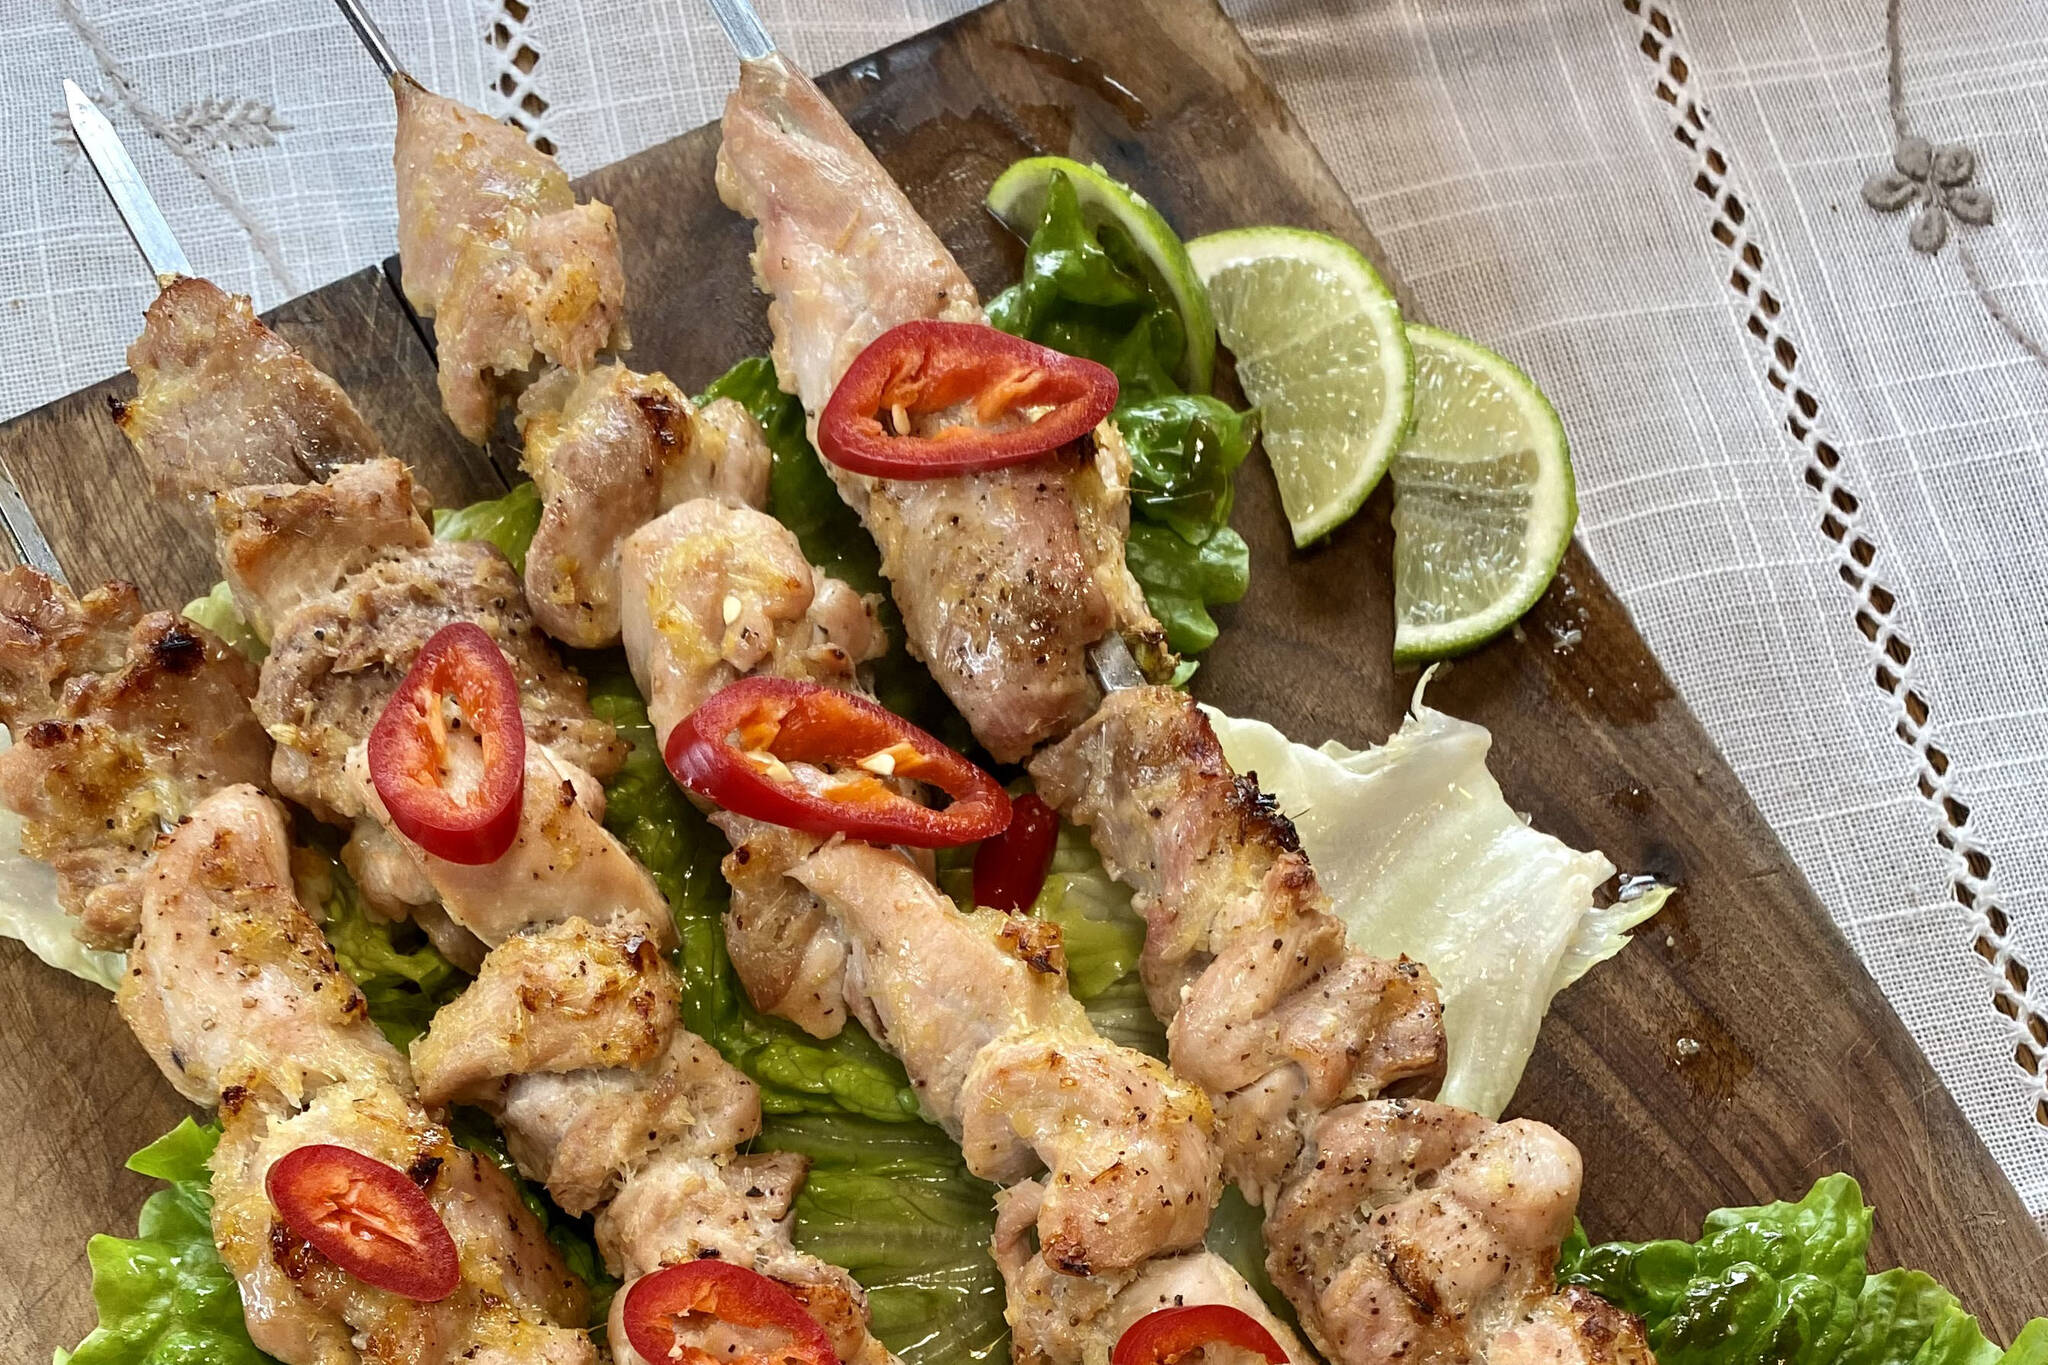 Lemongrass chicken skewers are best made on a grill, but can be made in the oven. (Photo by Tressa Dale/Peninsula Clarion